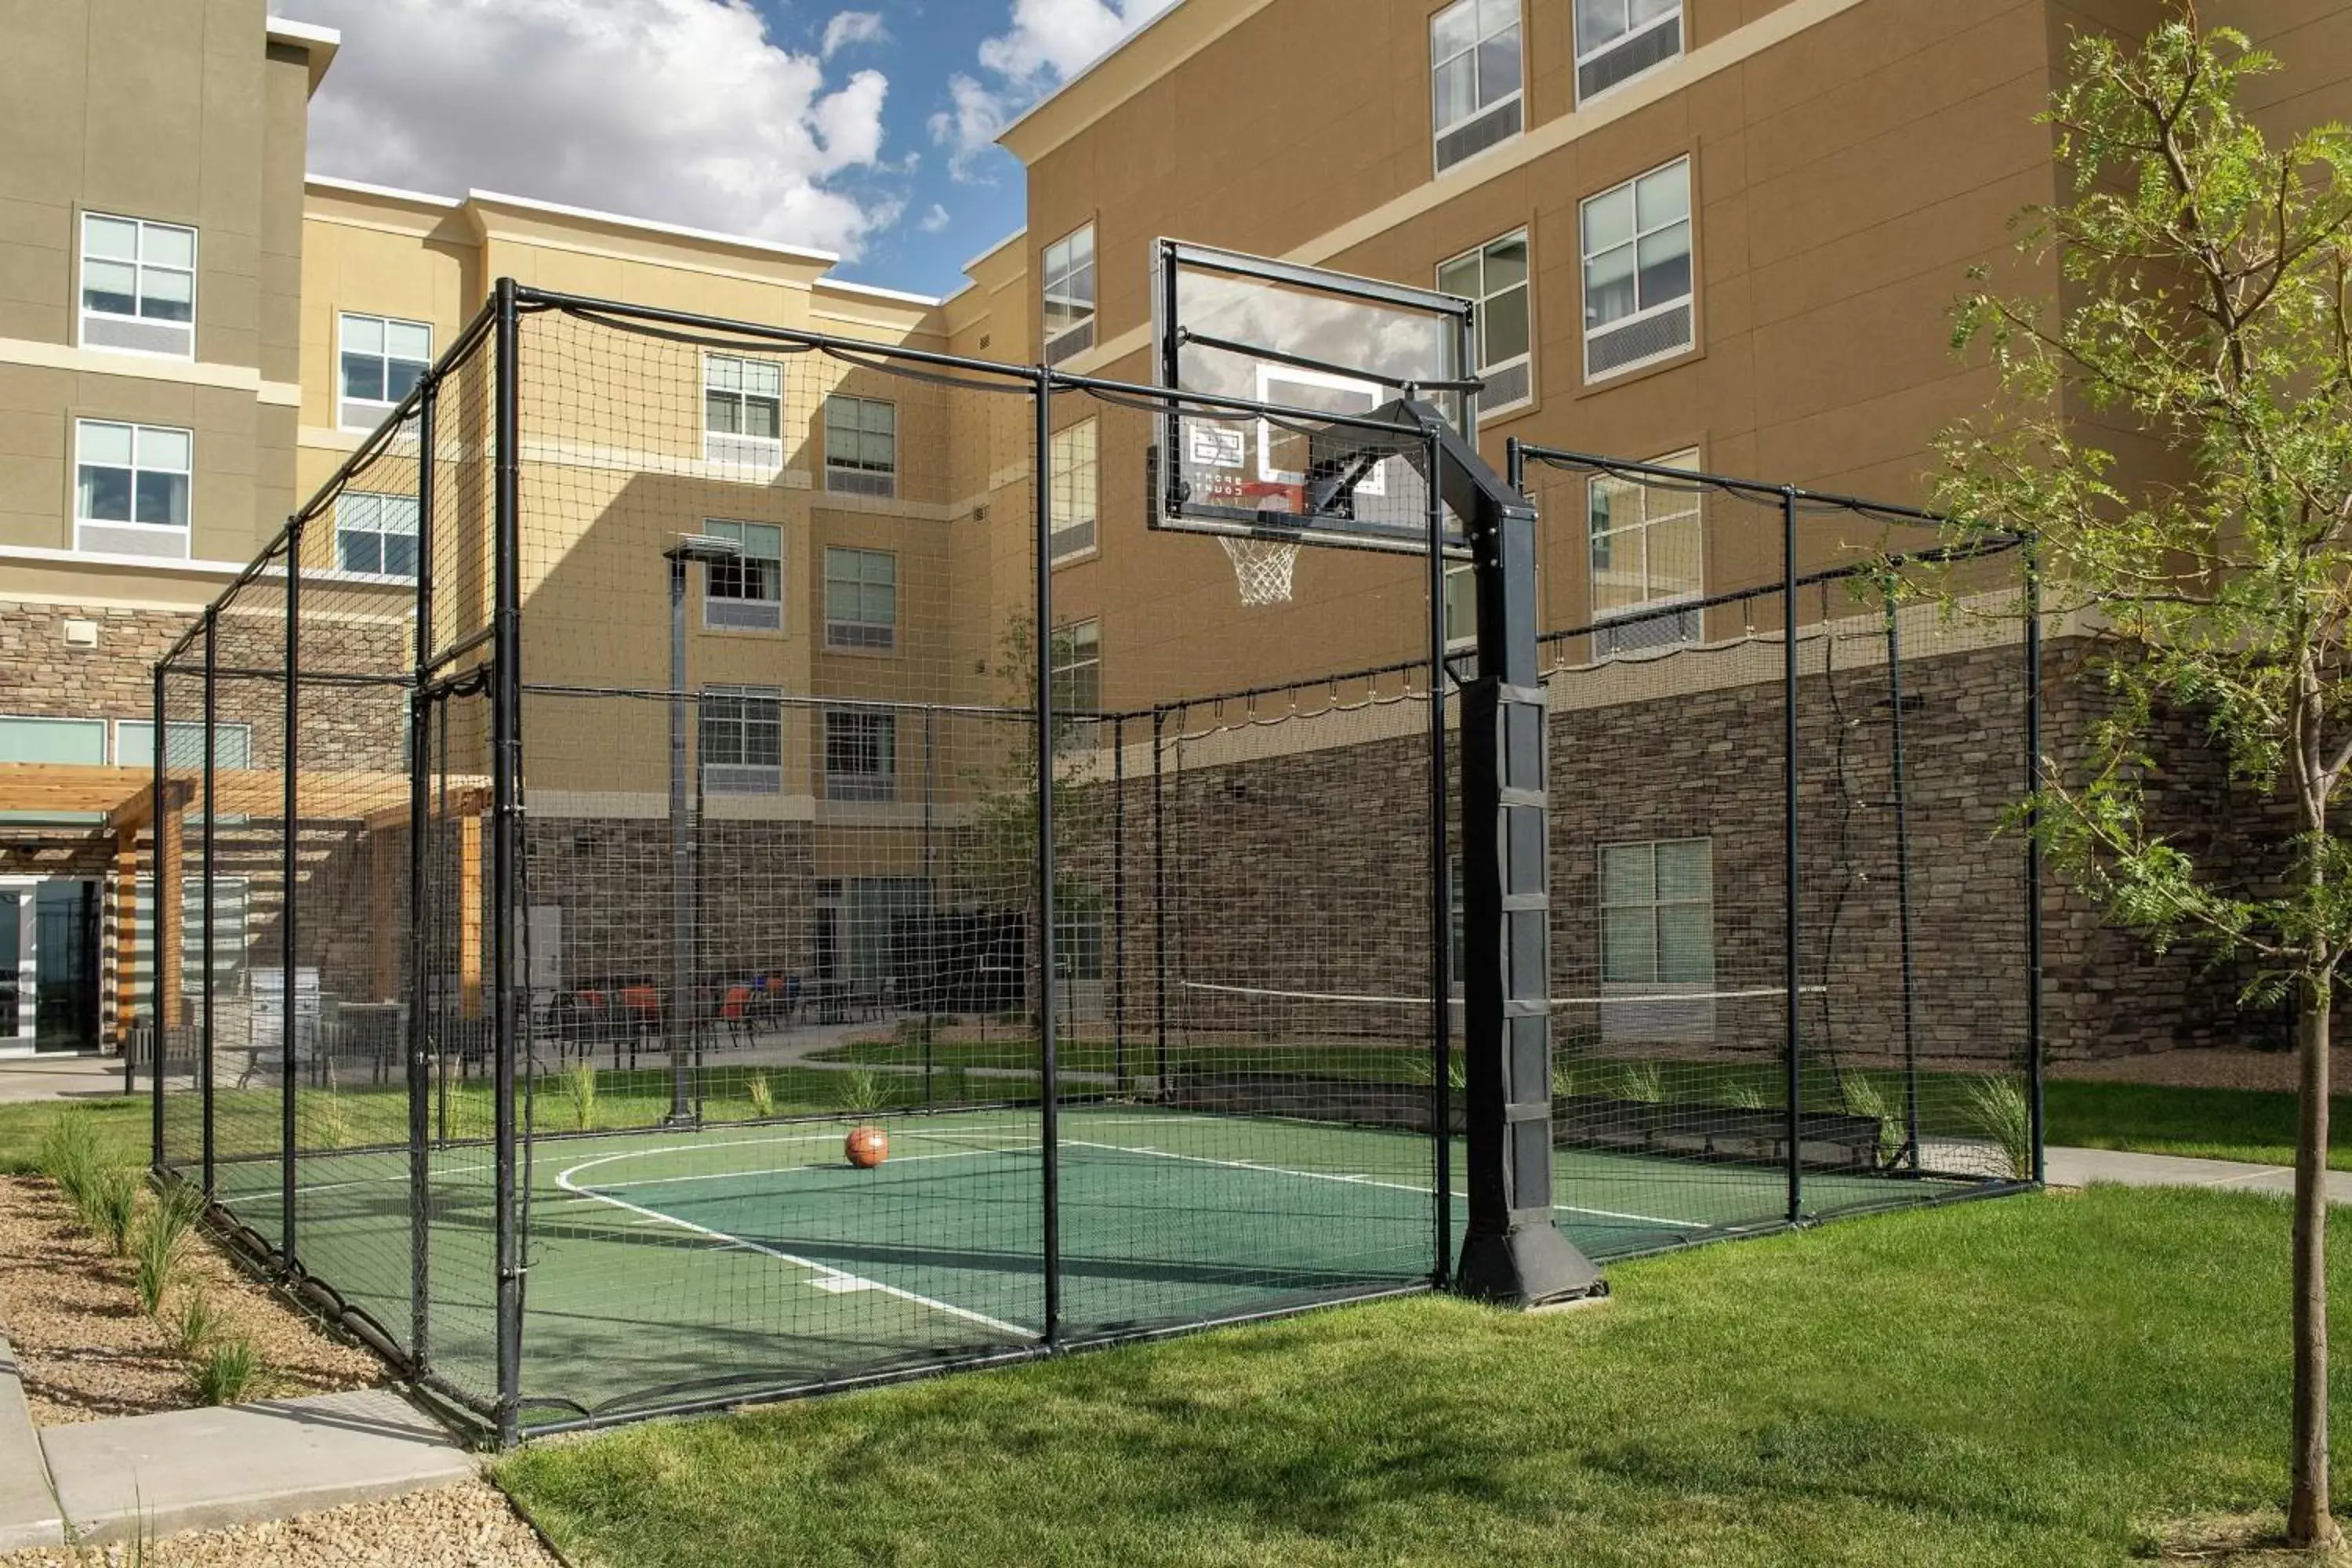 Sports, Other Activities in Tru By Hilton Denver Airport Tower Road